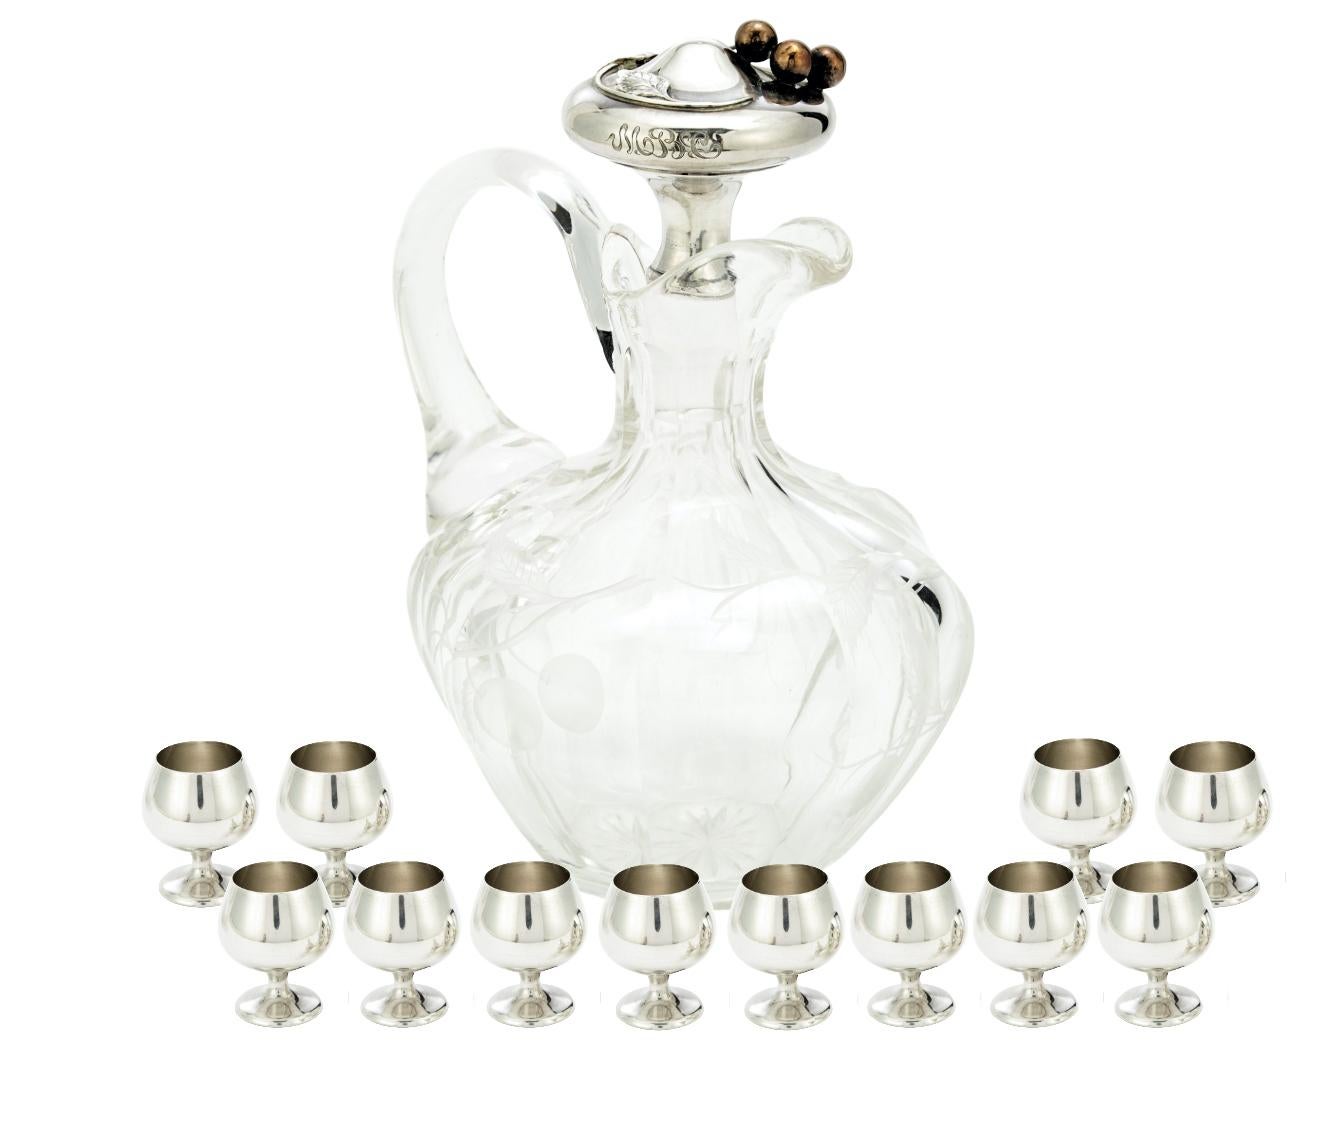 Indulge in the timeless elegance of our Mid-20th Century North American Sterling Silver Barware and Tableware Service, meticulously crafted by the renowned Gorham in the 1930s. This exquisite set is a true testament to quality craftsmanship and